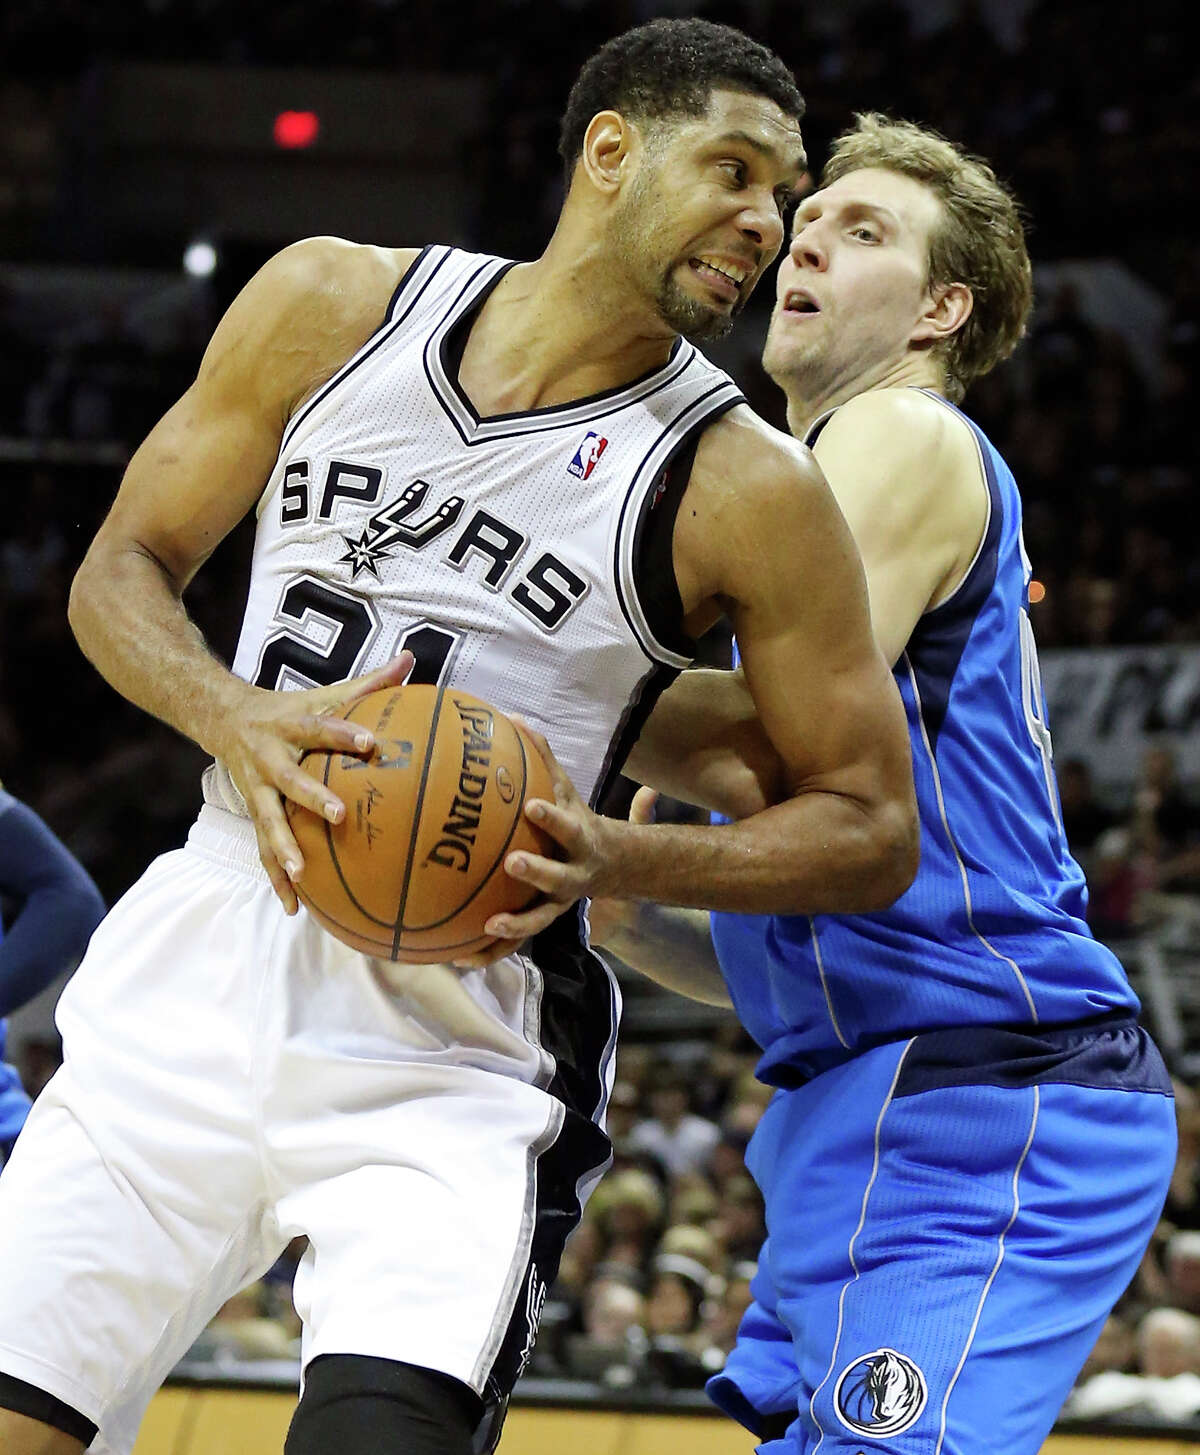 San Antonio Spurs' Tim Duncan looks for room around Dallas Mavericks' Dirk Nowitzki during second half action of Game 1 in the first round of the Western Conference playoffs Sunday April 20, 2014 at the AT&T Center. The Spurs won 90-85.